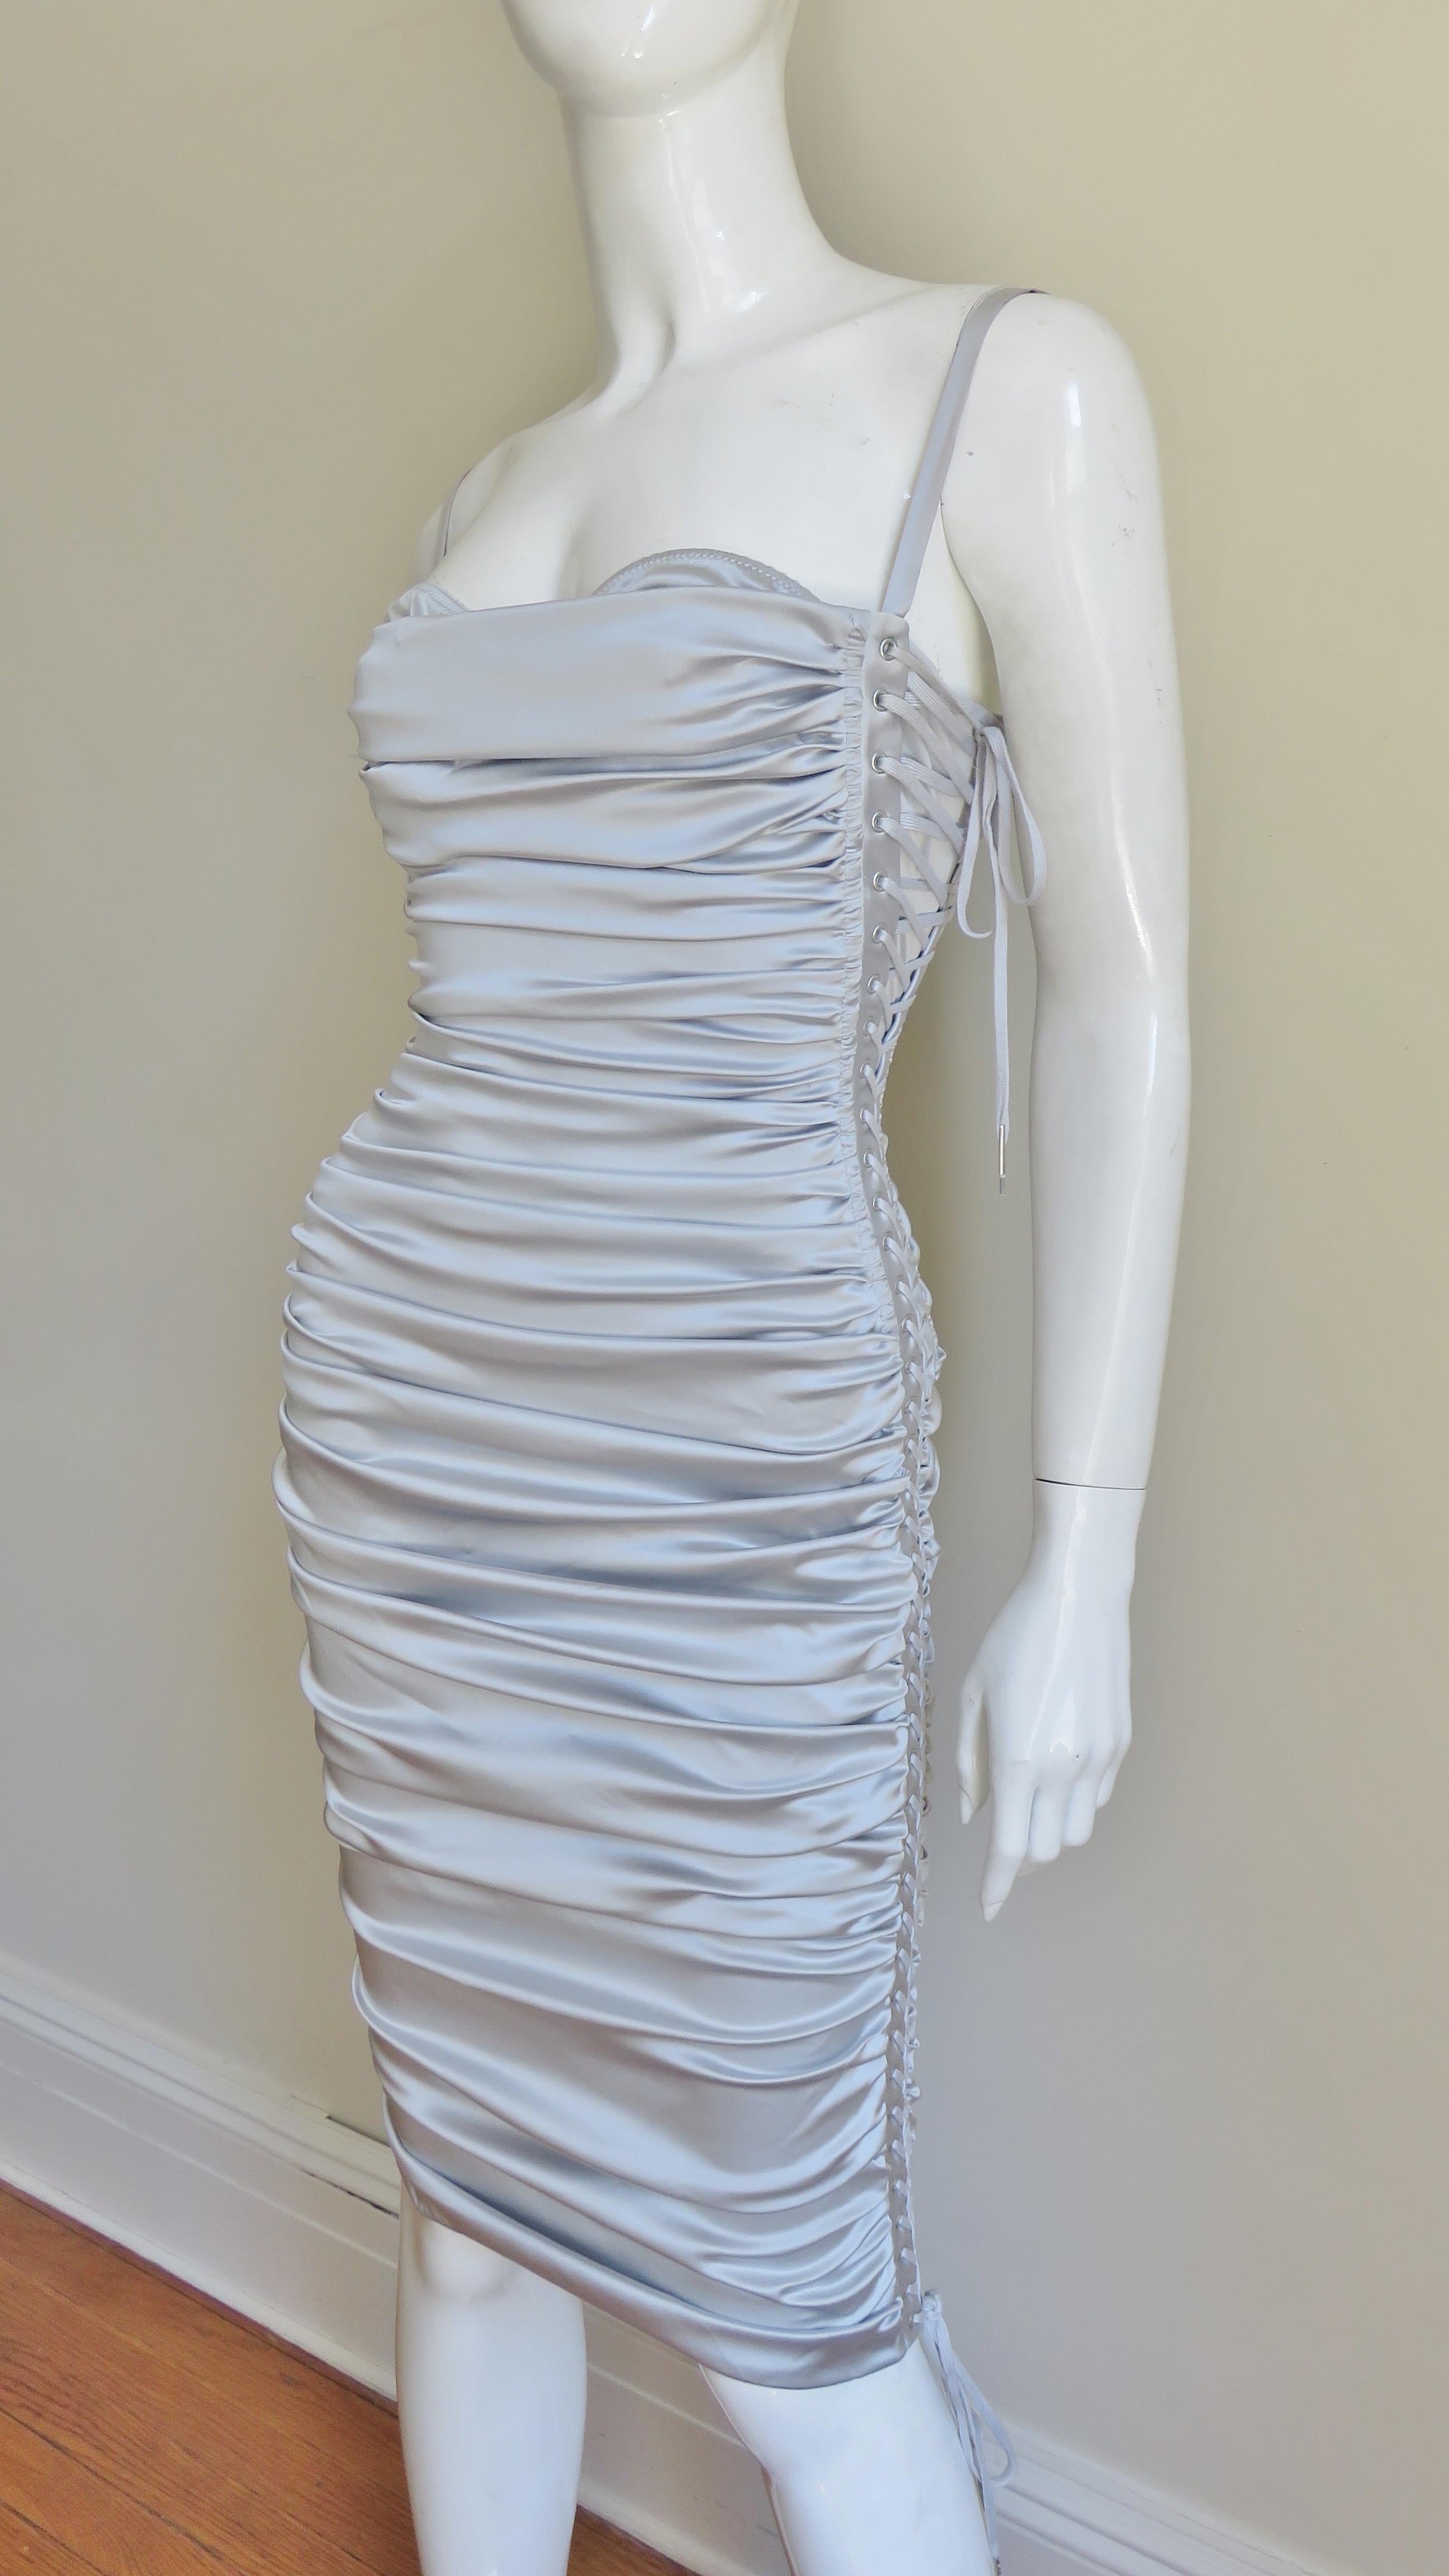 A fabulous silver grey stretch silk bodycon dress from Dolce and Gabbana.  It is horizontally ruched across the body the length of the dress with adjustable lacing along the side.  It has an attached matching silk bra with adjustable straps that